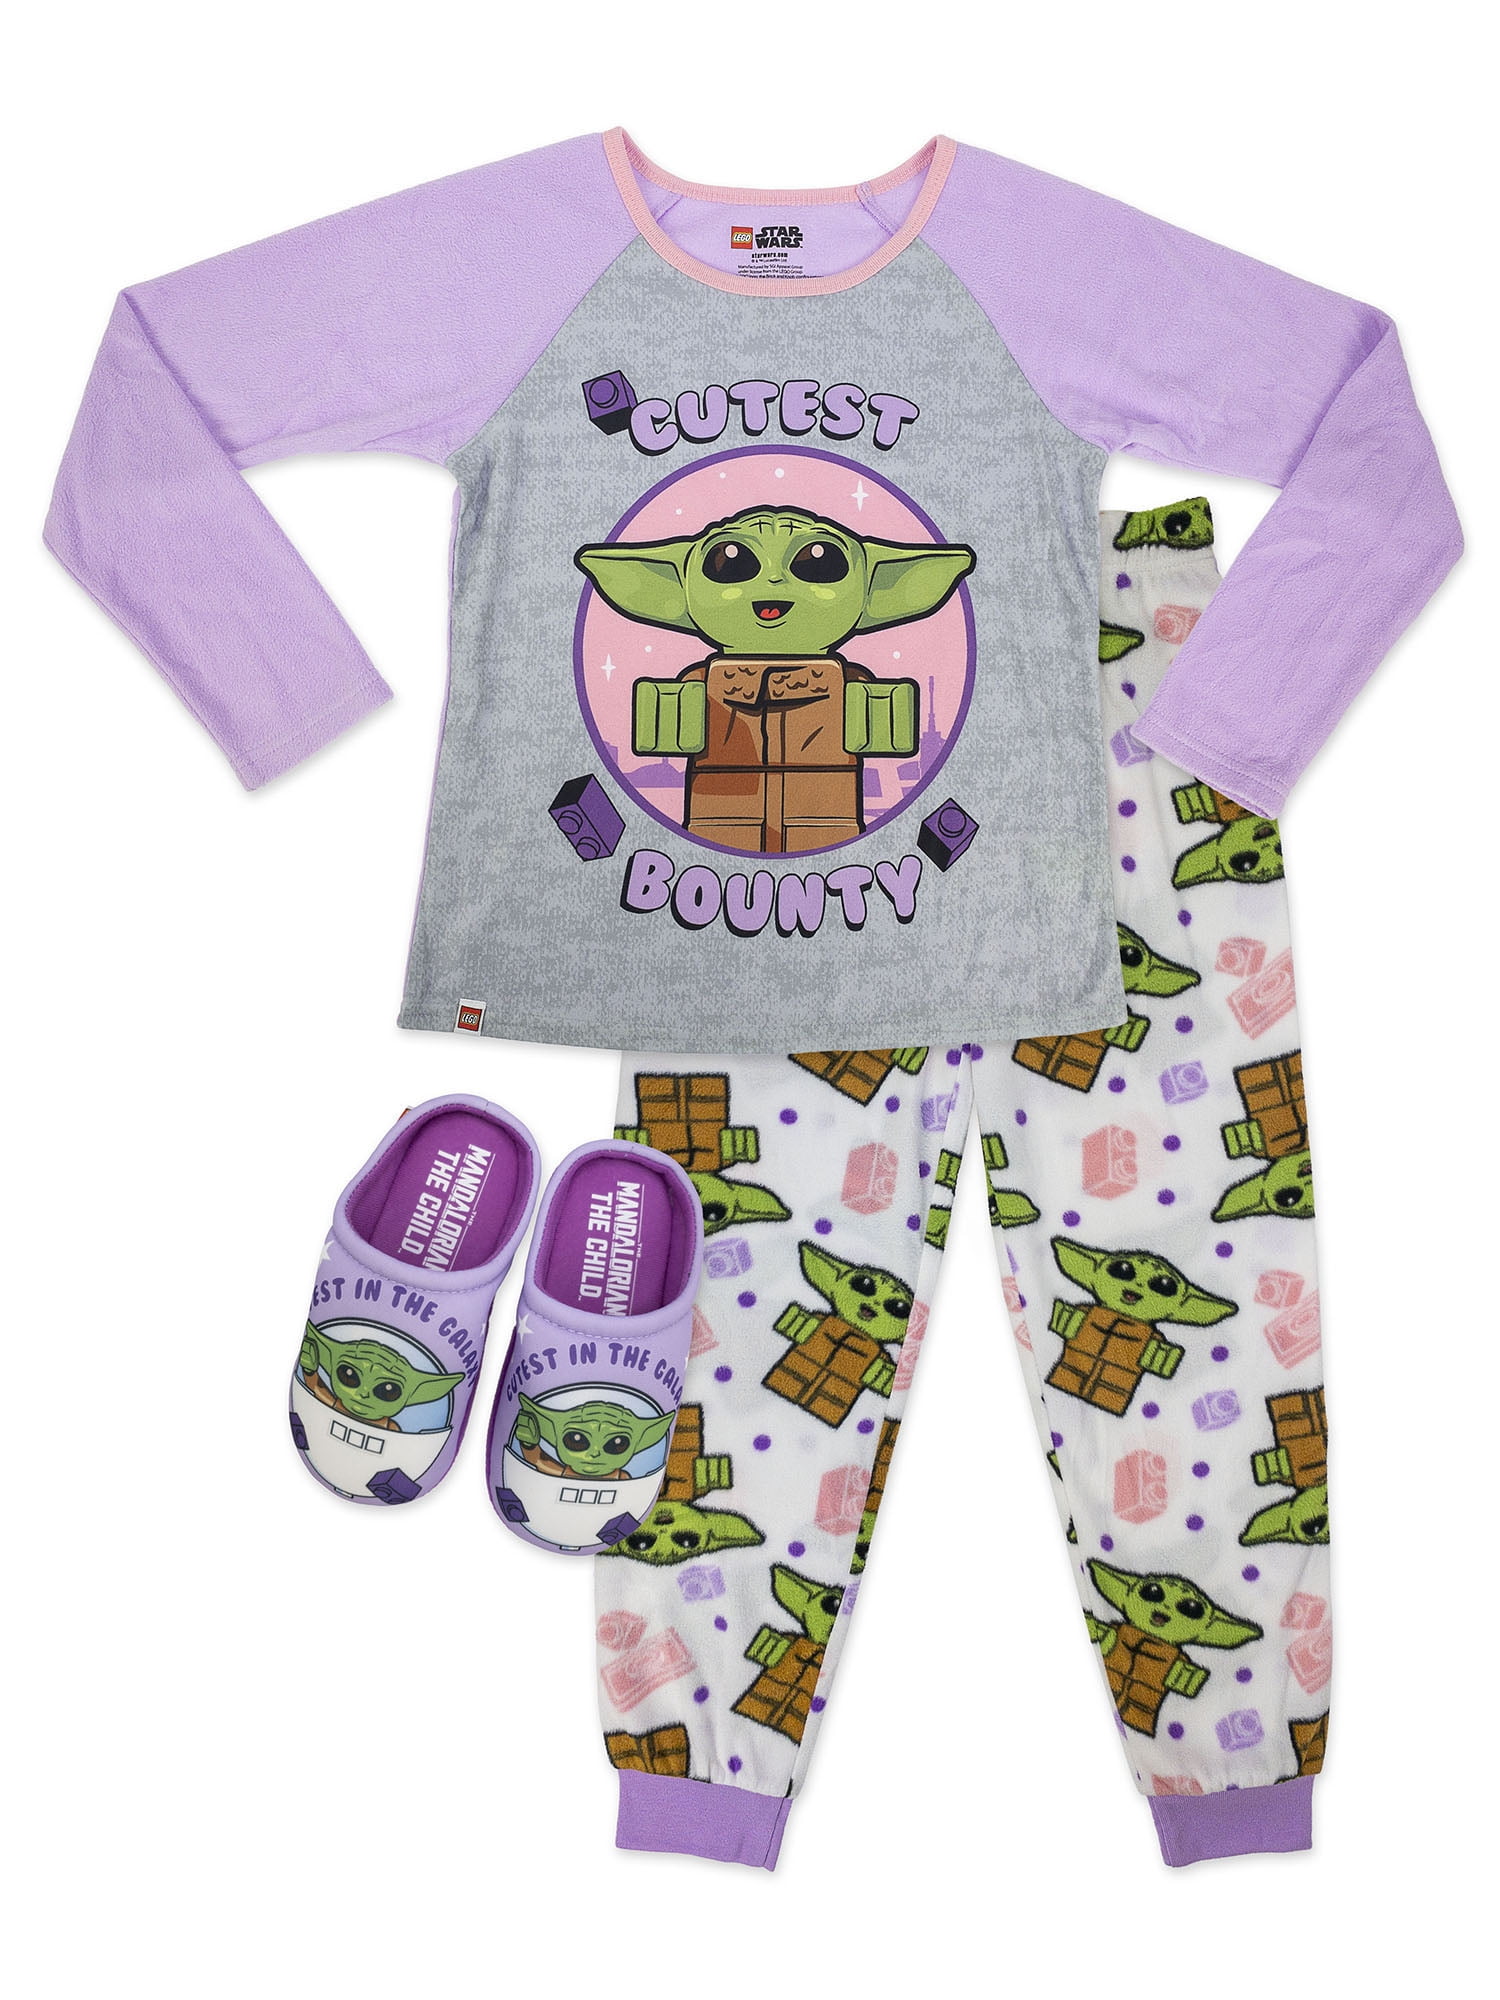 Just Character Girls Older LOL Surprise Go LOL Pyjamas Sizes 4/5 to 9/10 years 